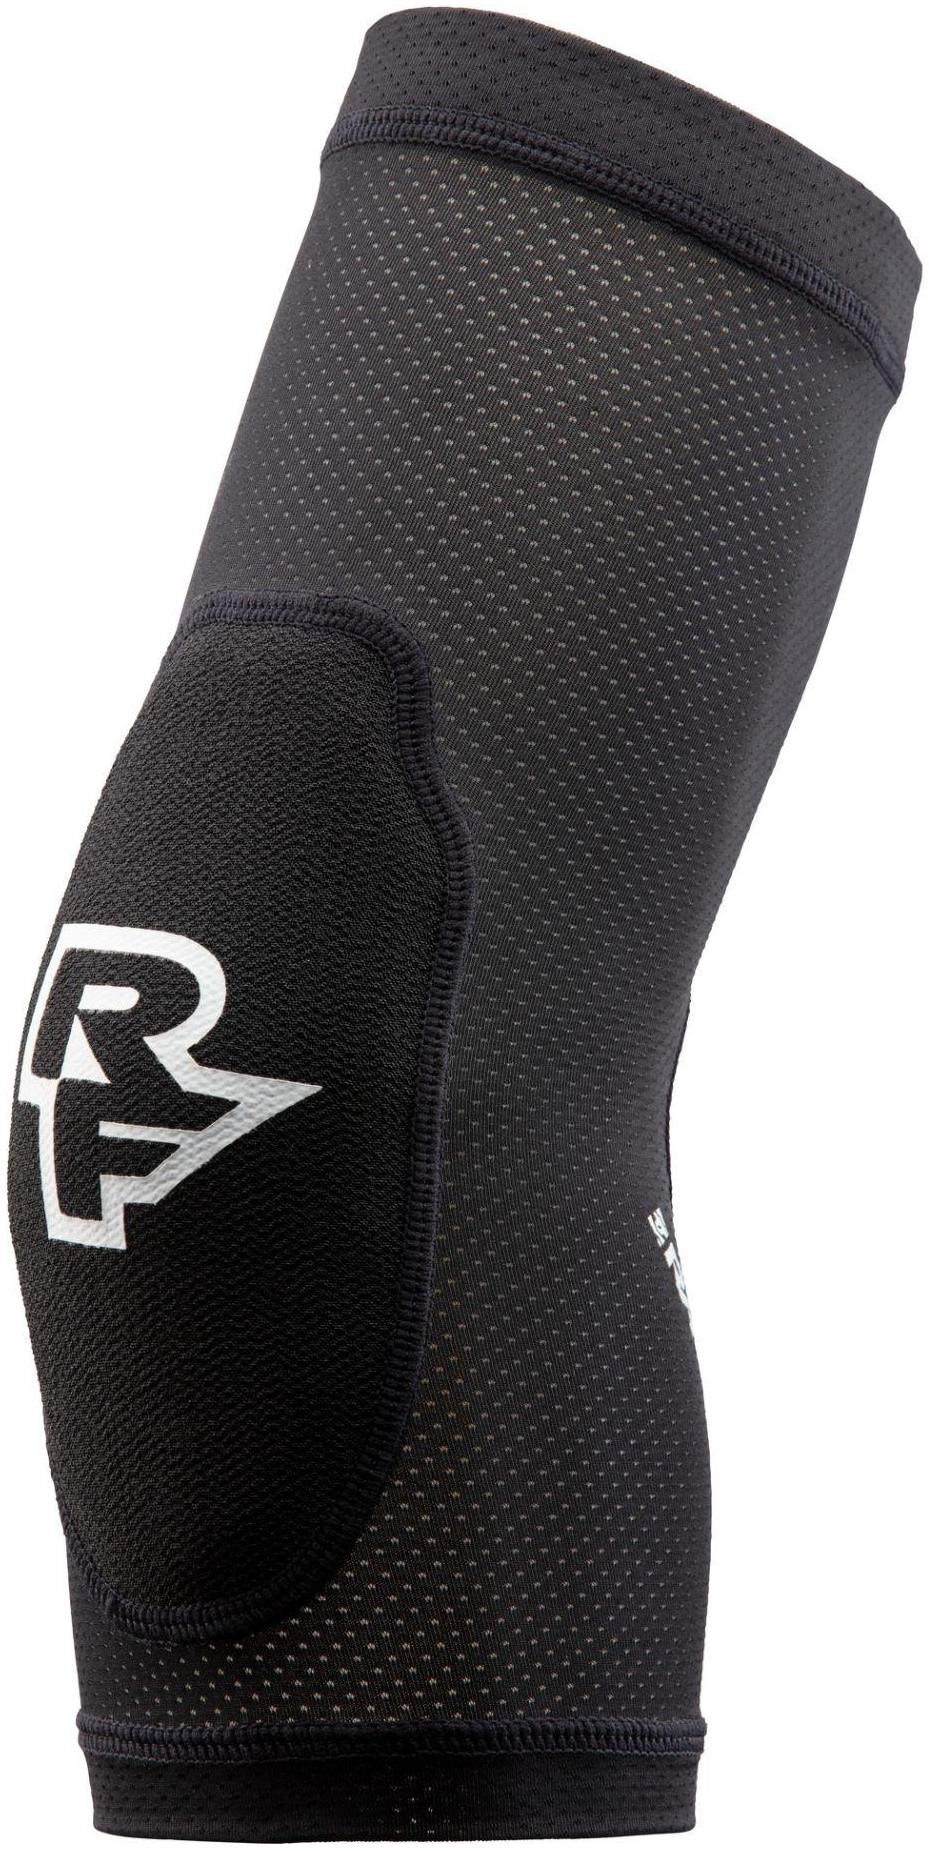 Charge Stealth Elbow Guards image 0